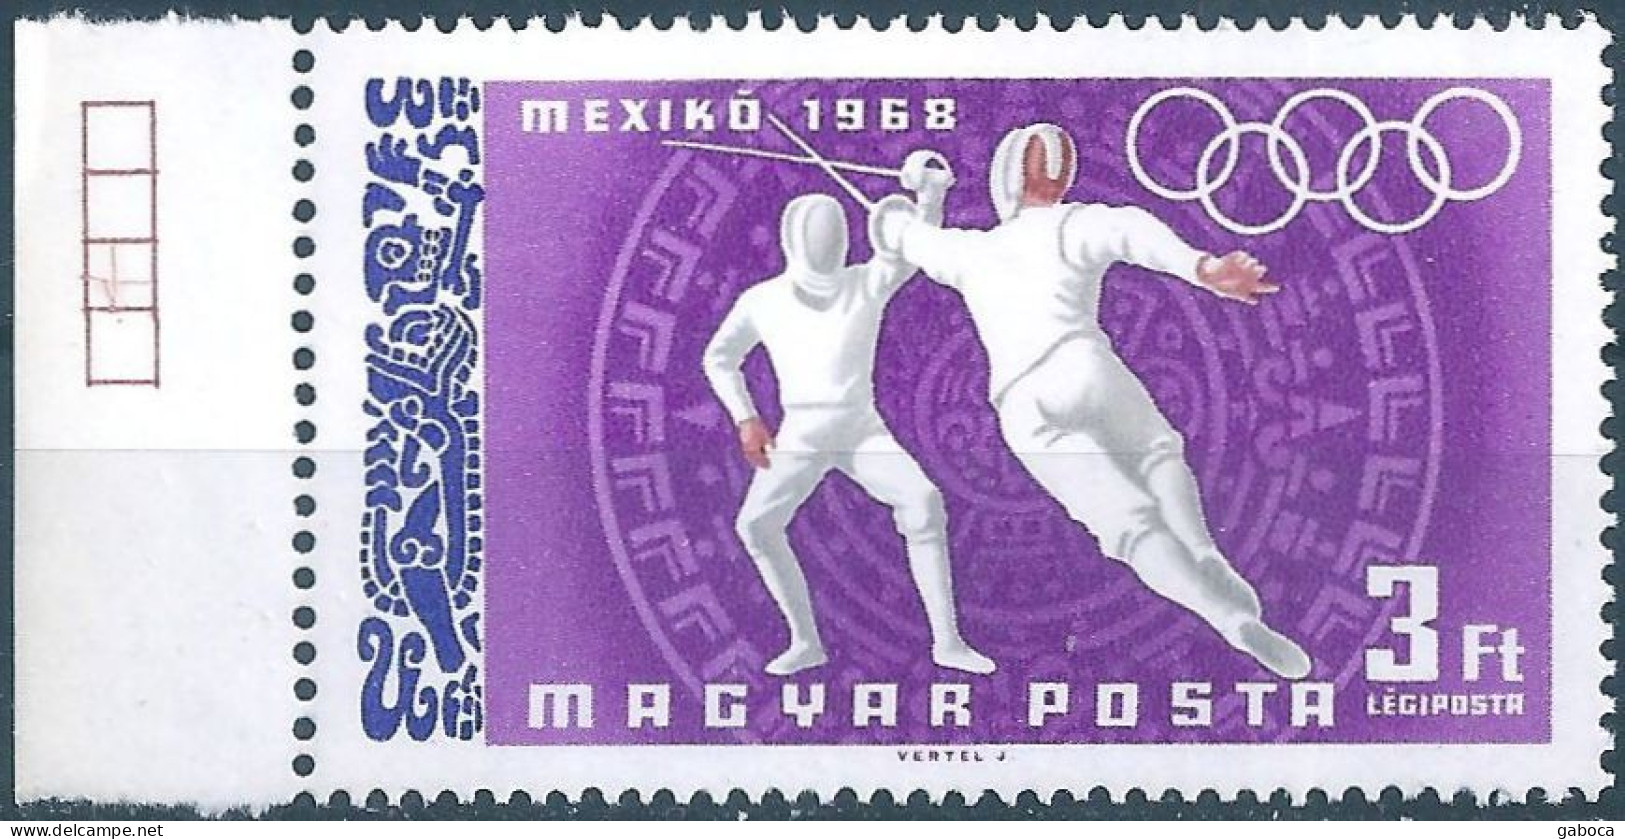 C5863 Hungary Olympics Mexico Sport Fencing MNH RARE - Sommer 1968: Mexico